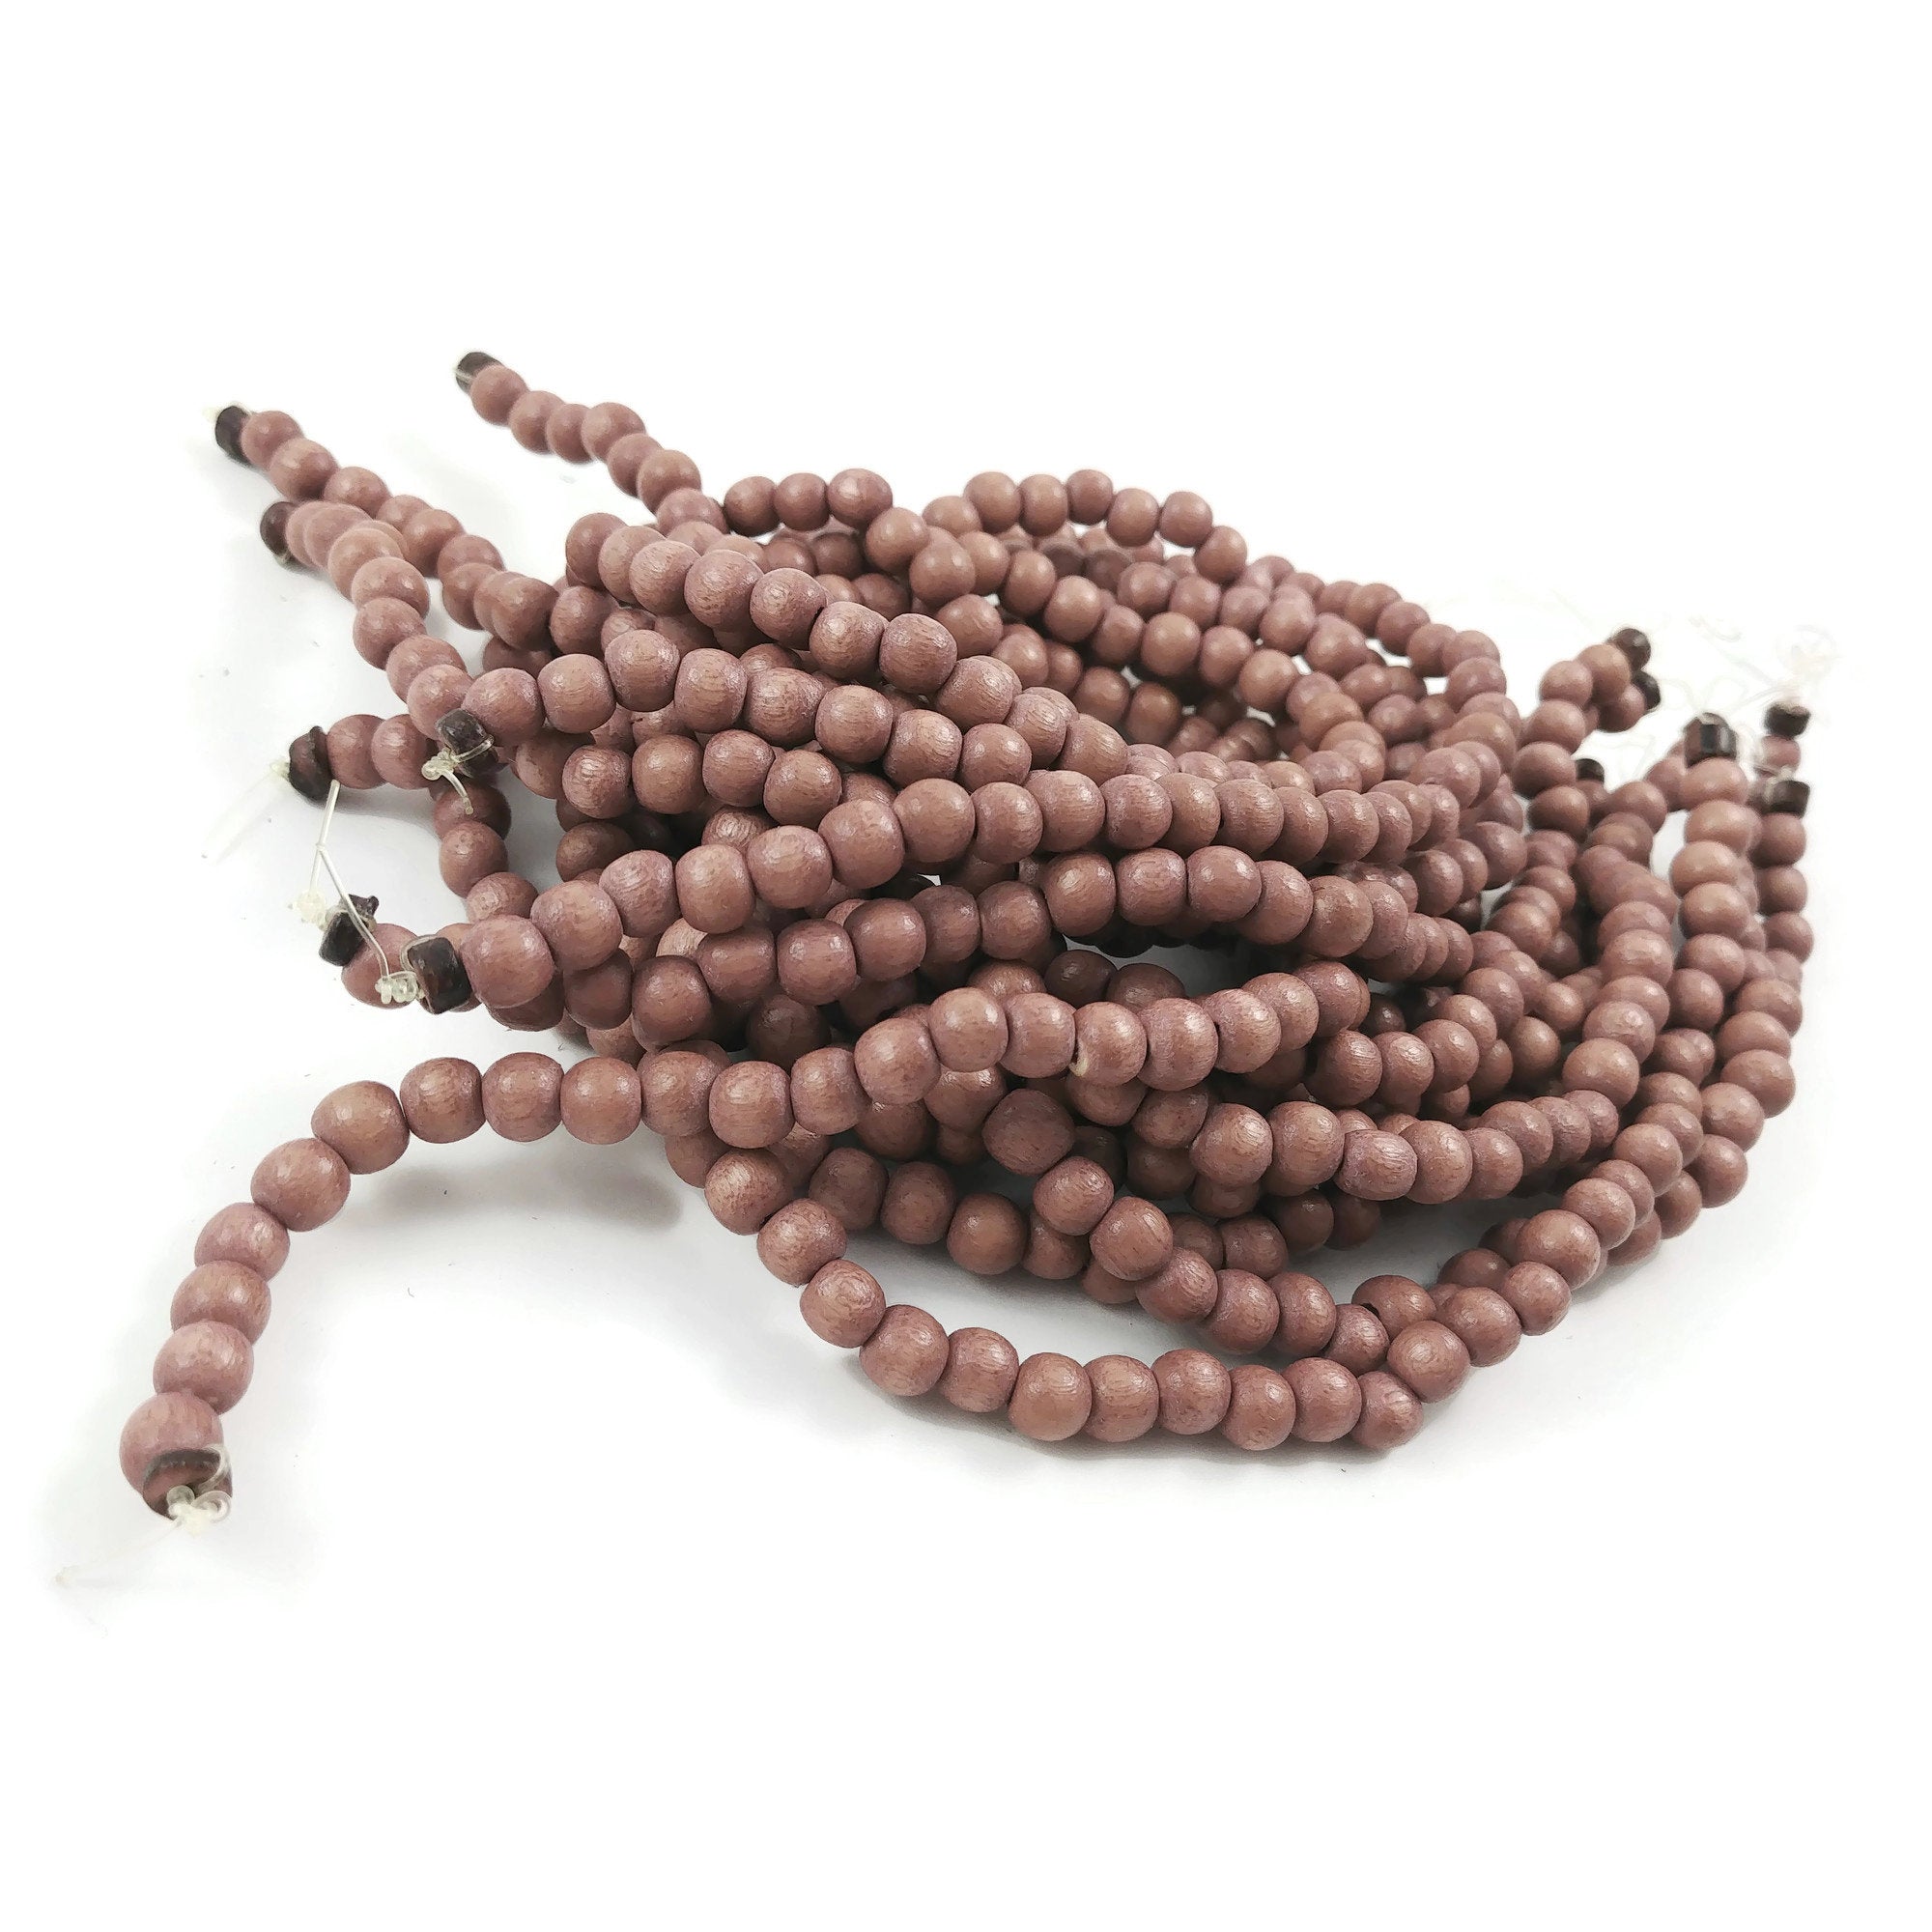 6 or 8mm Wood round beads - Beige